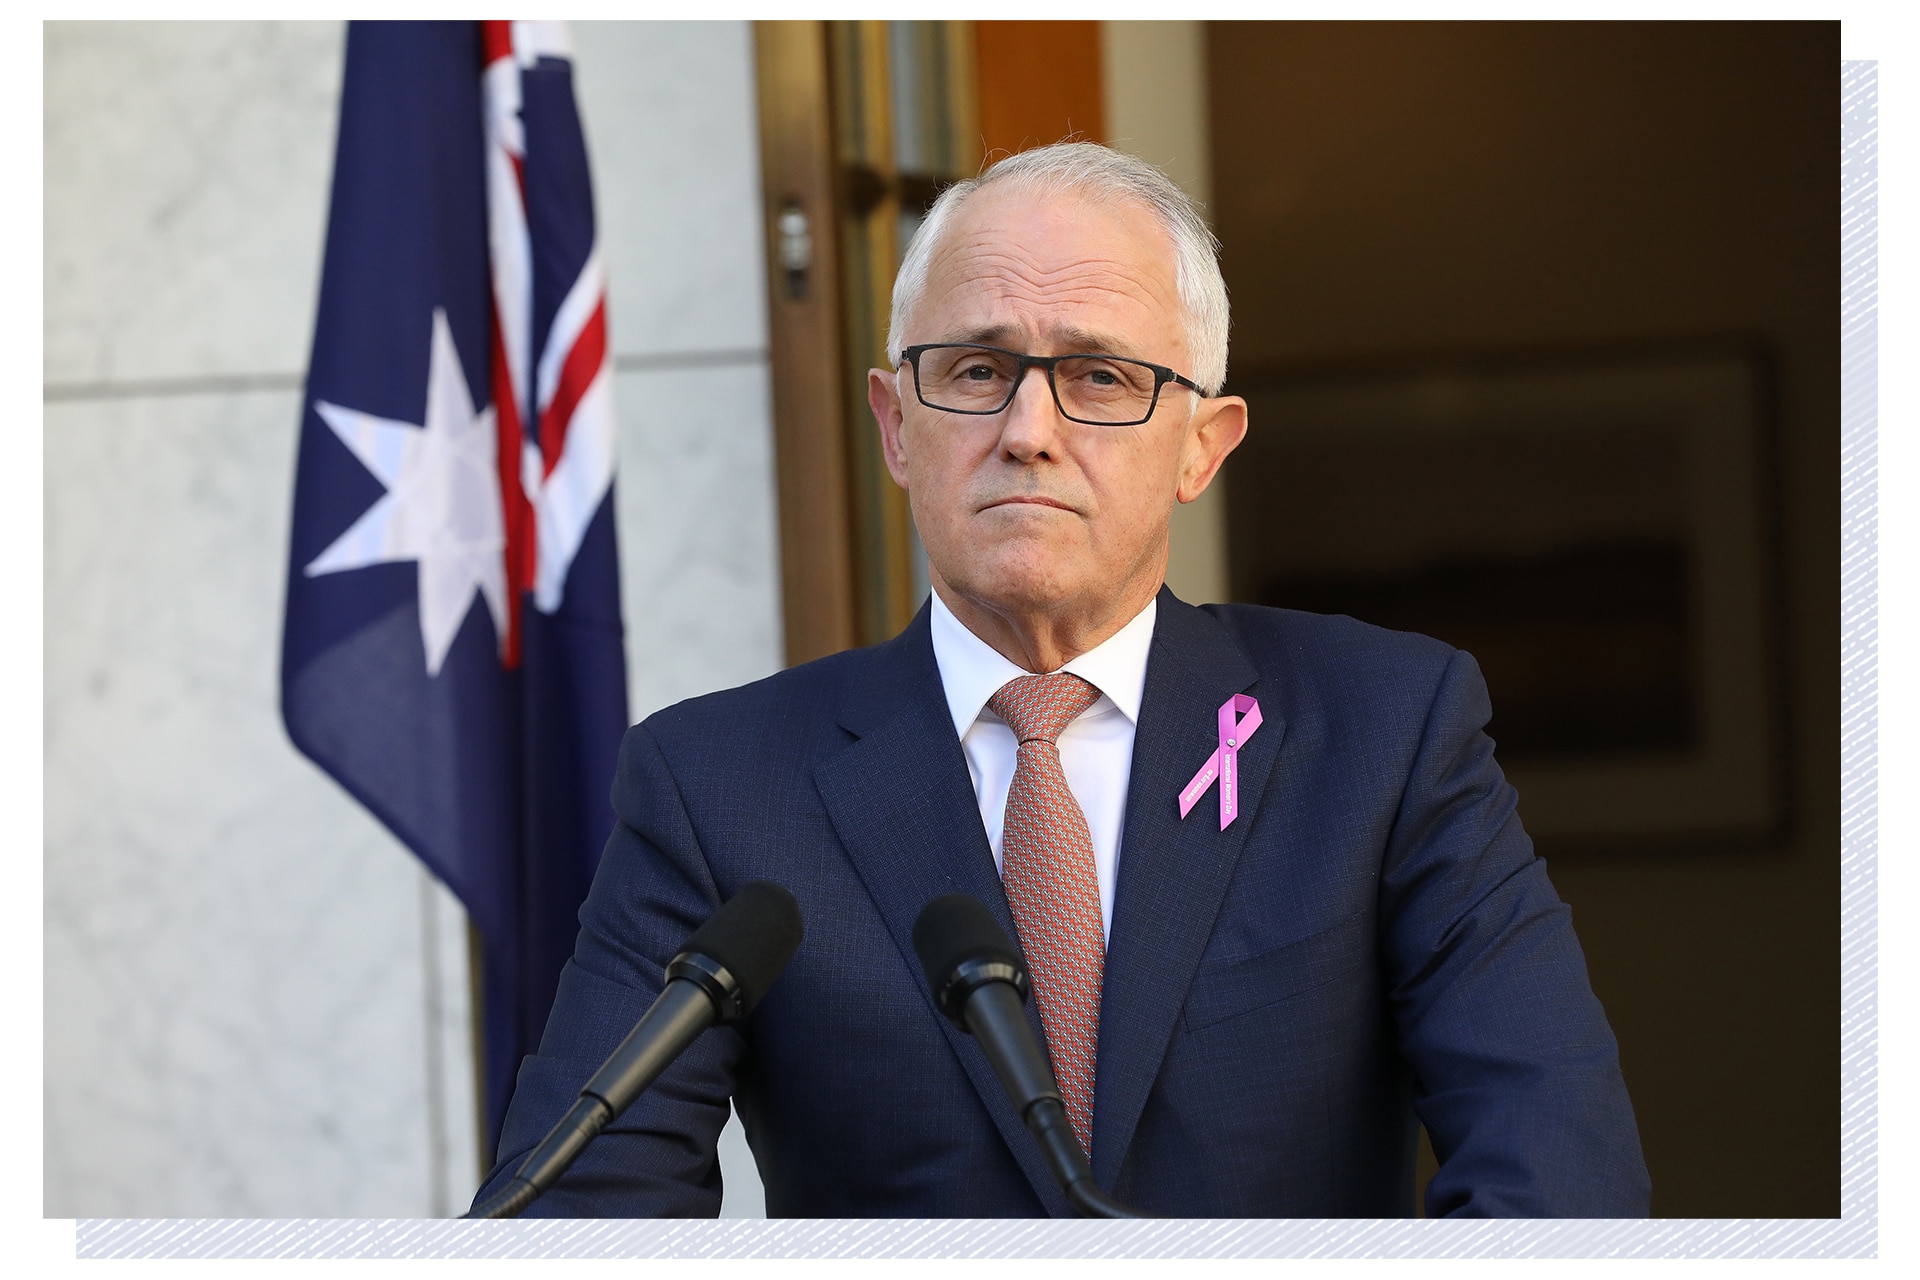 Dressed in a suit with a purple ribbon on his lapel, Malcolm Turnbull stands at a lectern, looking serious.